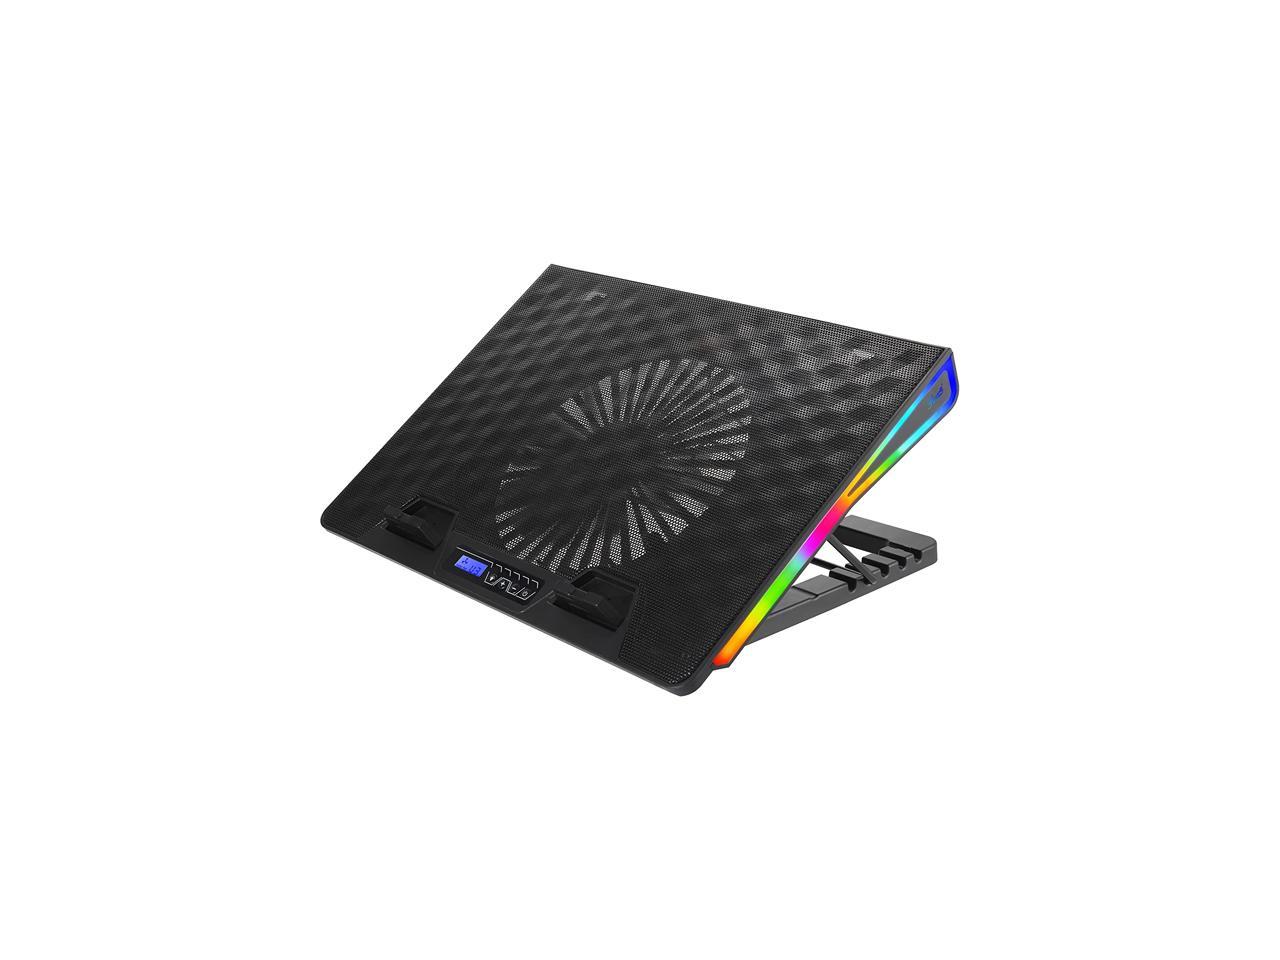 Rosewill RWNB17C Laptop Cooler, RGB Cooling Pad with Big 180mm Quiet Fan, Adjustable Angles, Lighting Modes and Fan Speeds, USB Ports, Metal Mesh for Optimal Cooling for 12 - 17 inch Notebooks